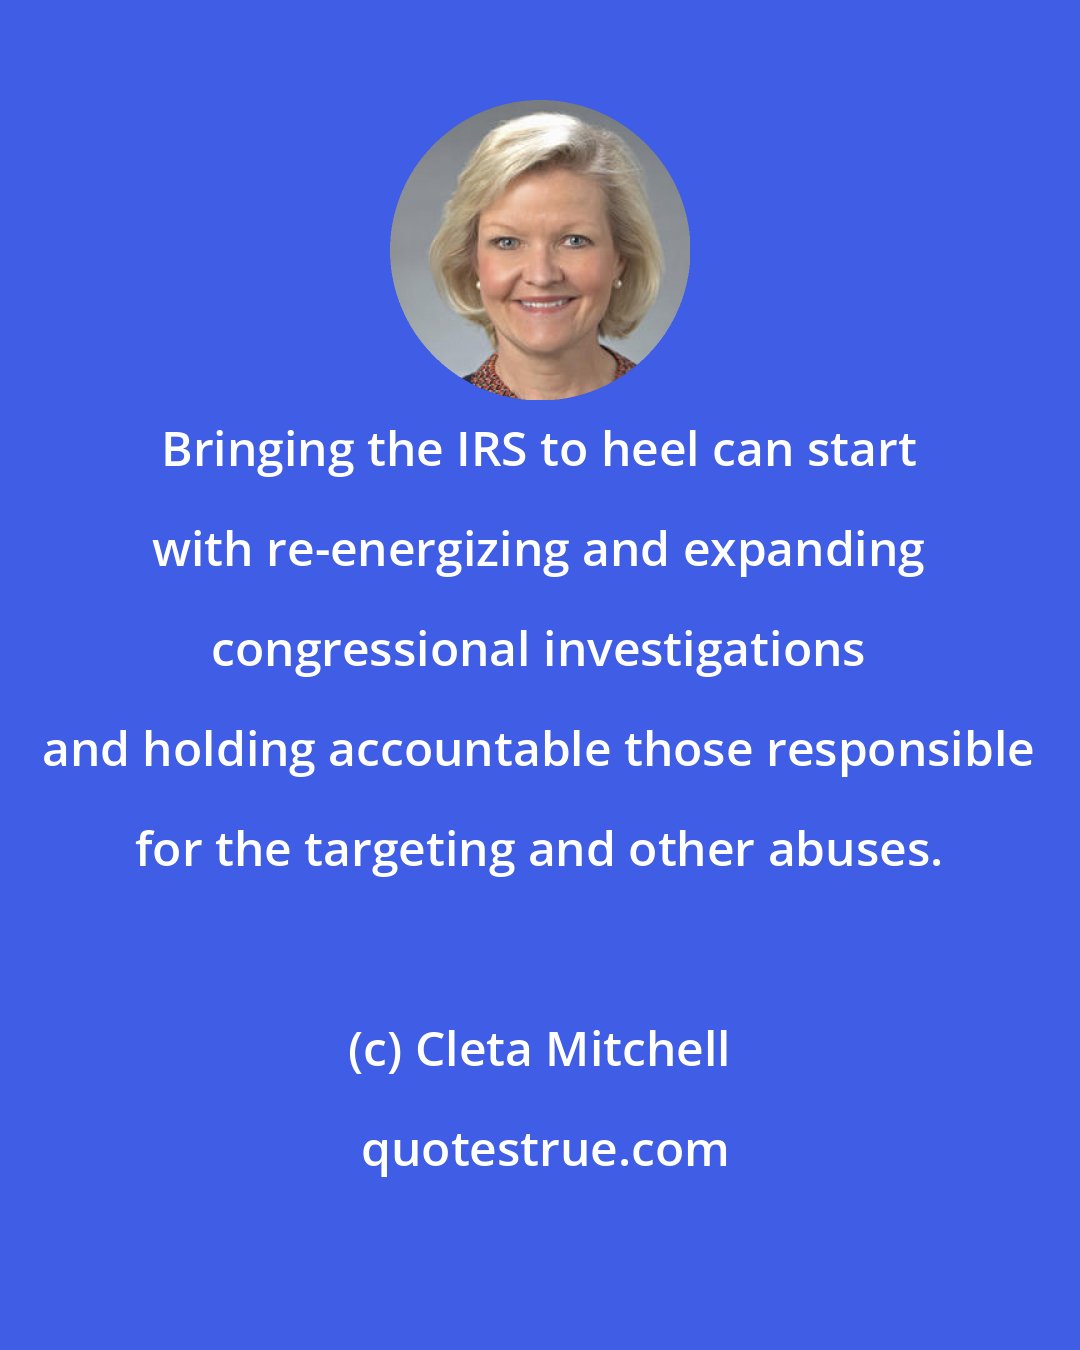 Cleta Mitchell: Bringing the IRS to heel can start with re-energizing and expanding congressional investigations and holding accountable those responsible for the targeting and other abuses.